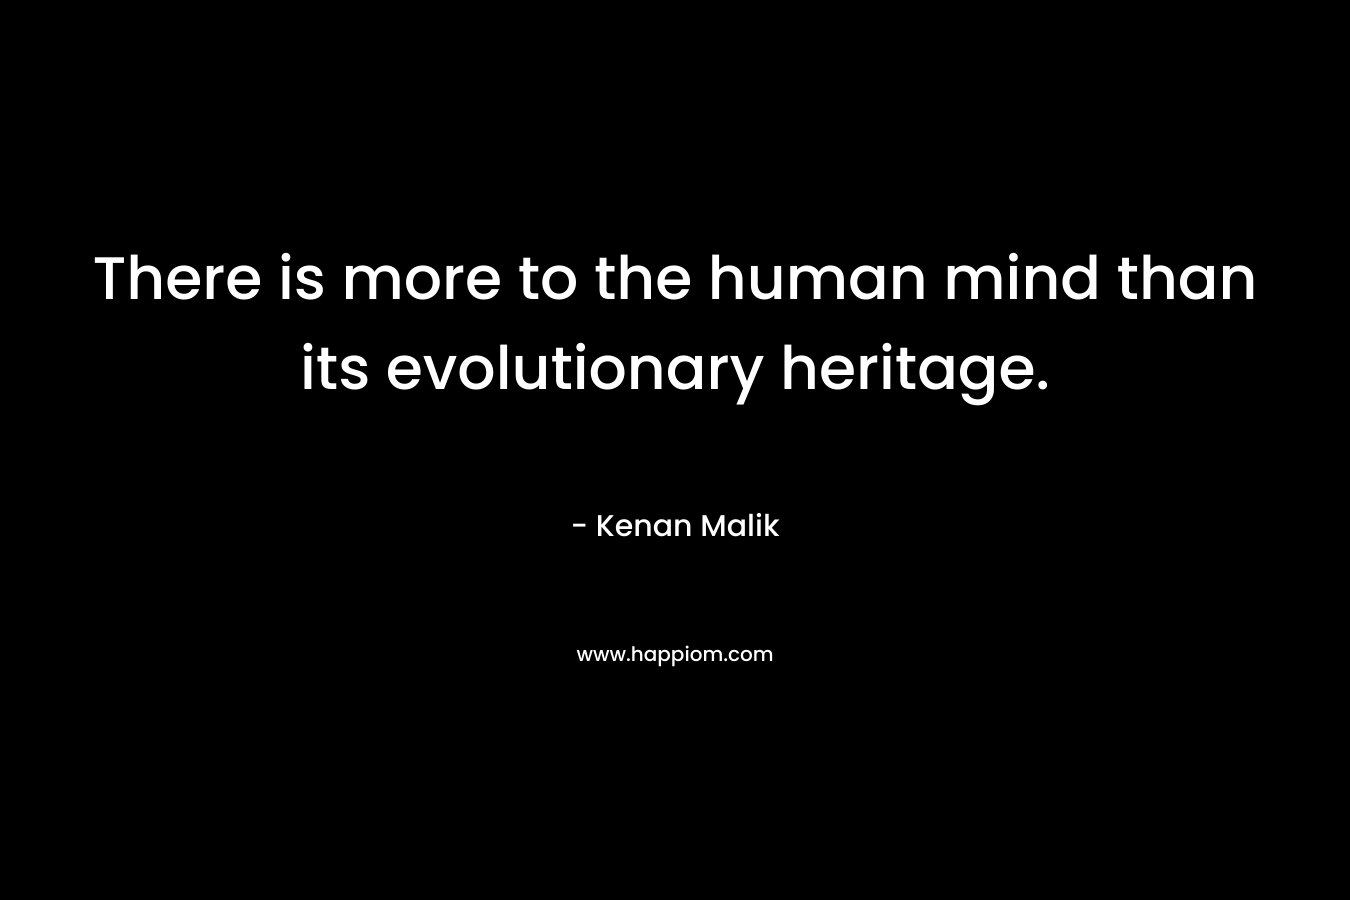 There is more to the human mind than its evolutionary heritage. – Kenan Malik